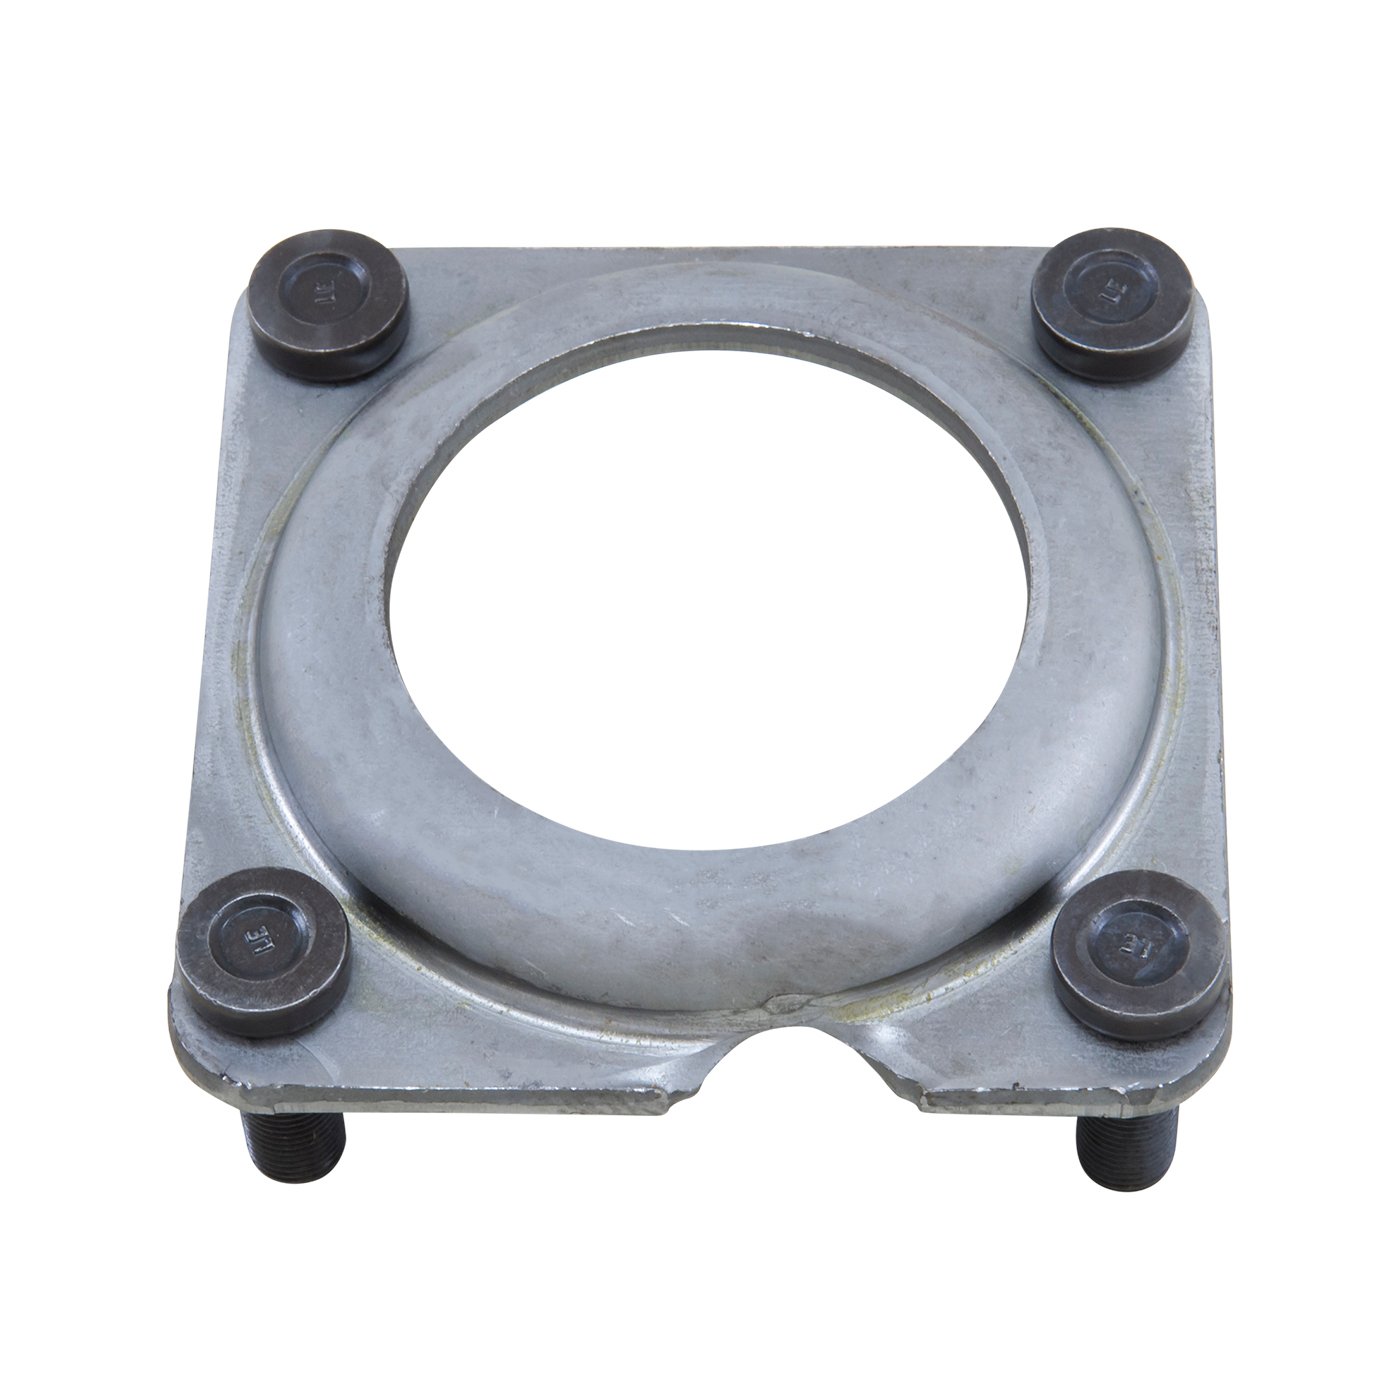 Axle Bearing Retainer Plate For Super 35 Rear.